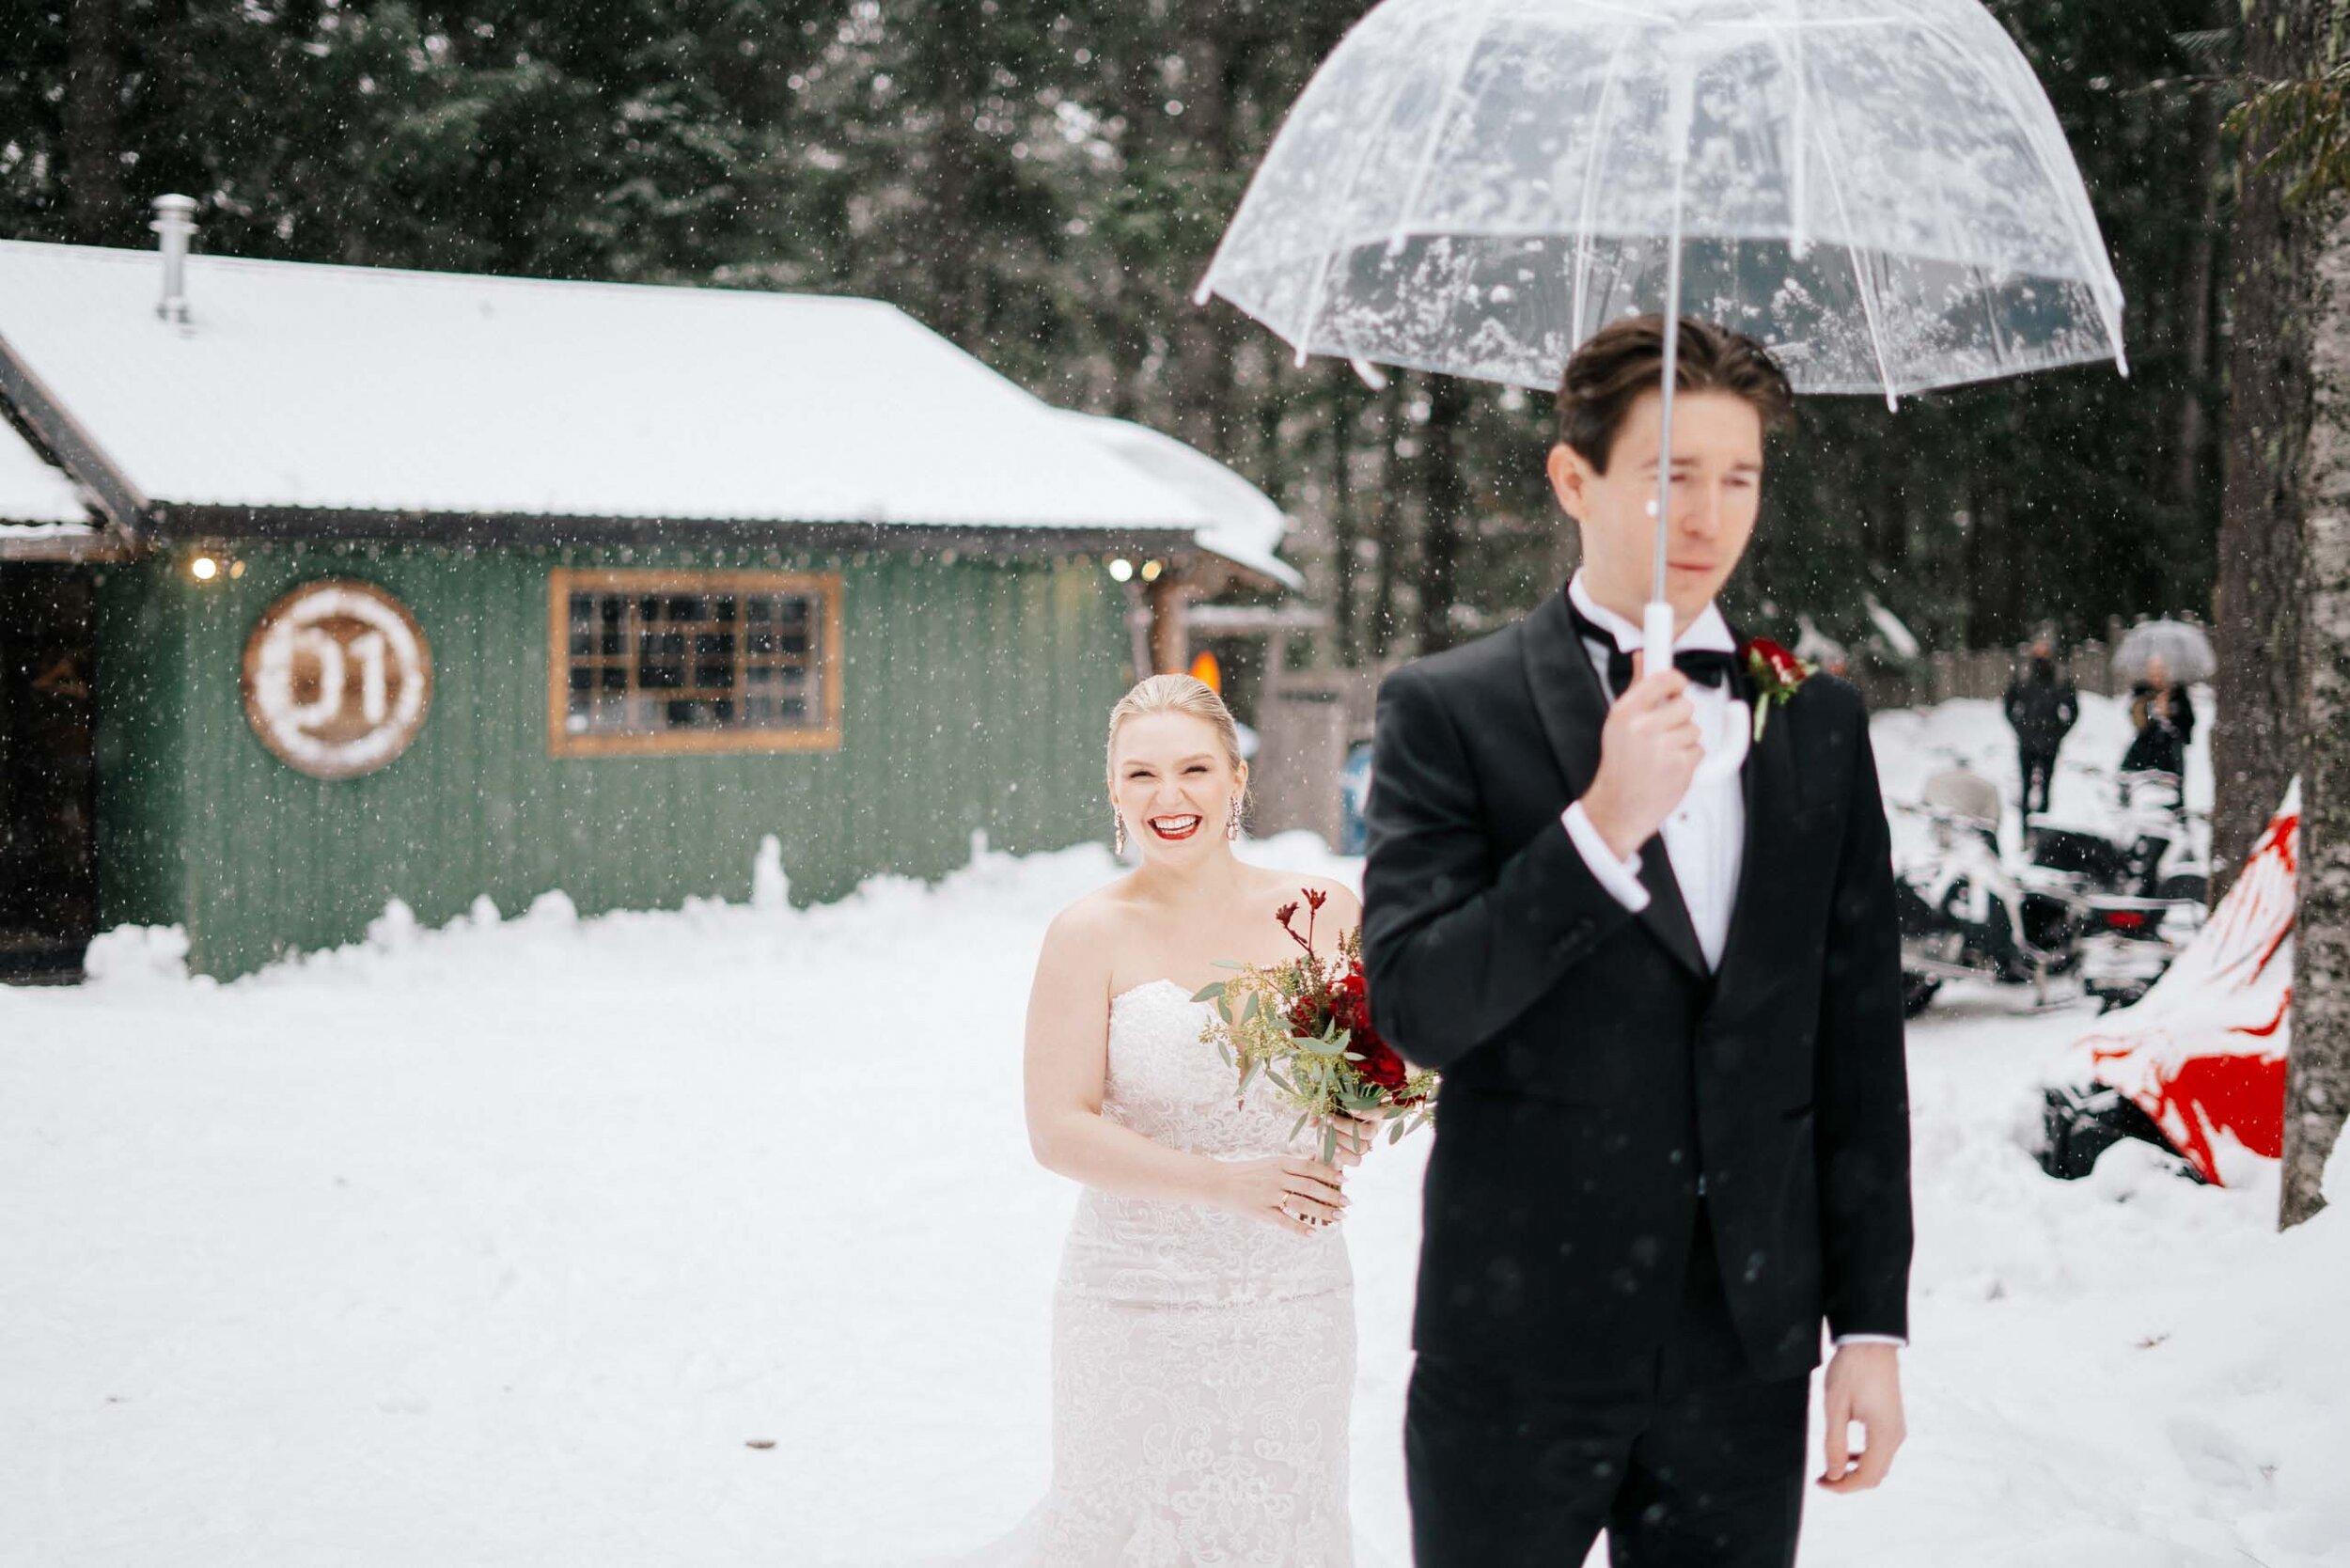 A bride stands behind her groom, before the first look, as snow falls on the couple.